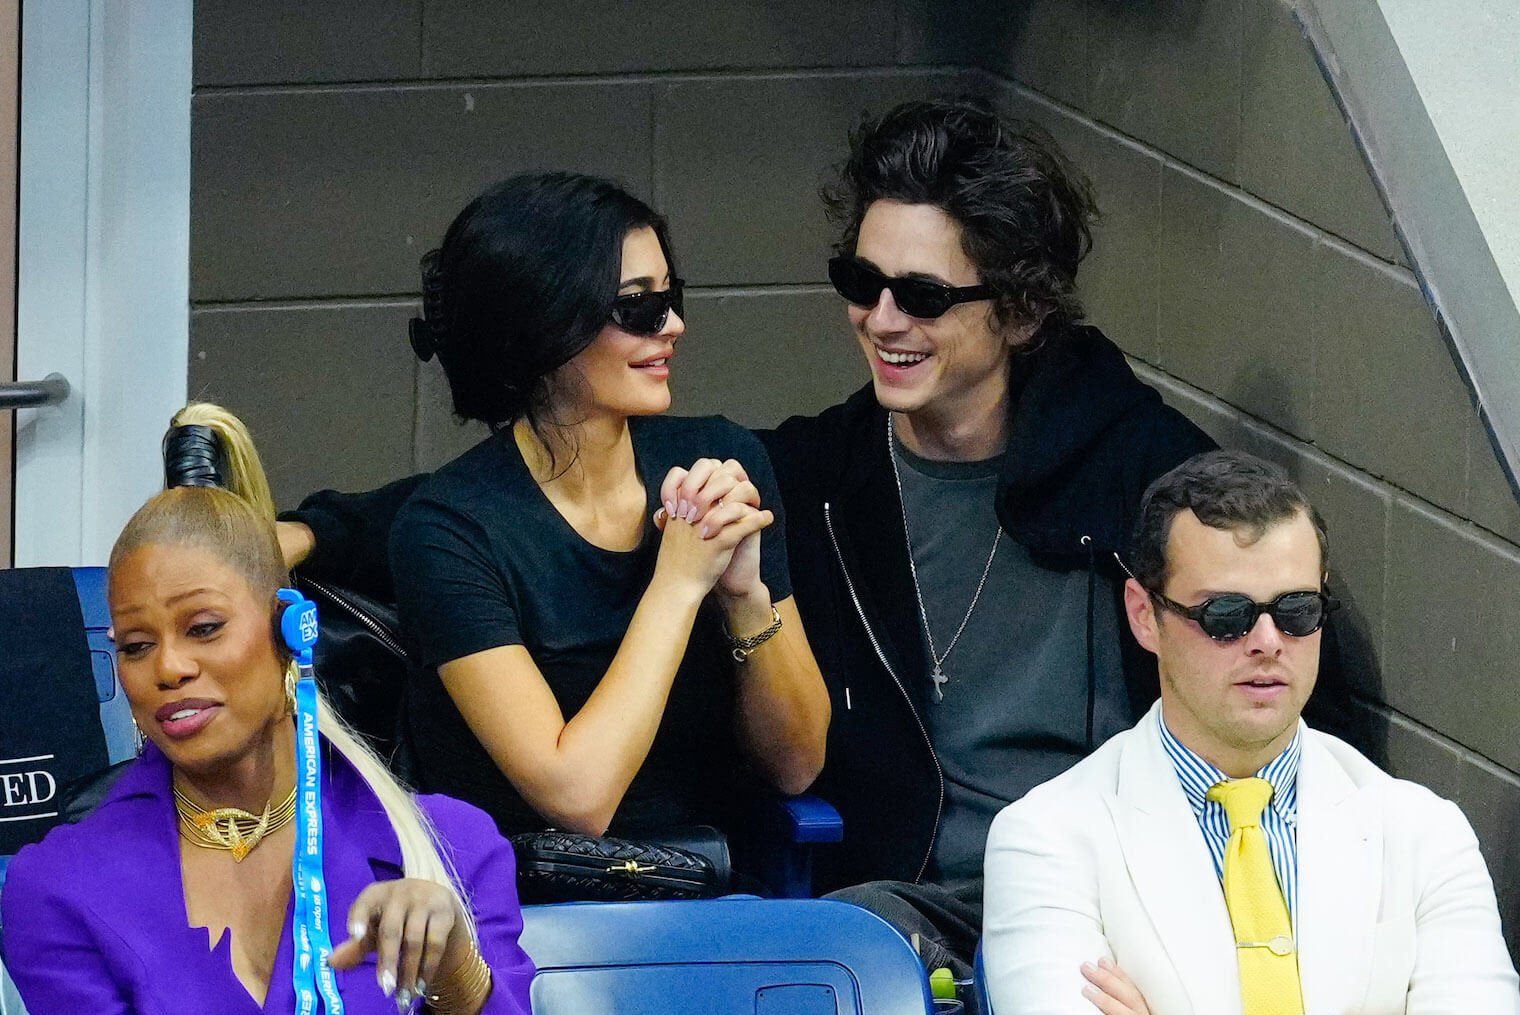 Kylie Jenner and Timothée Chalamet sitting next to each other at the U.S. Open 